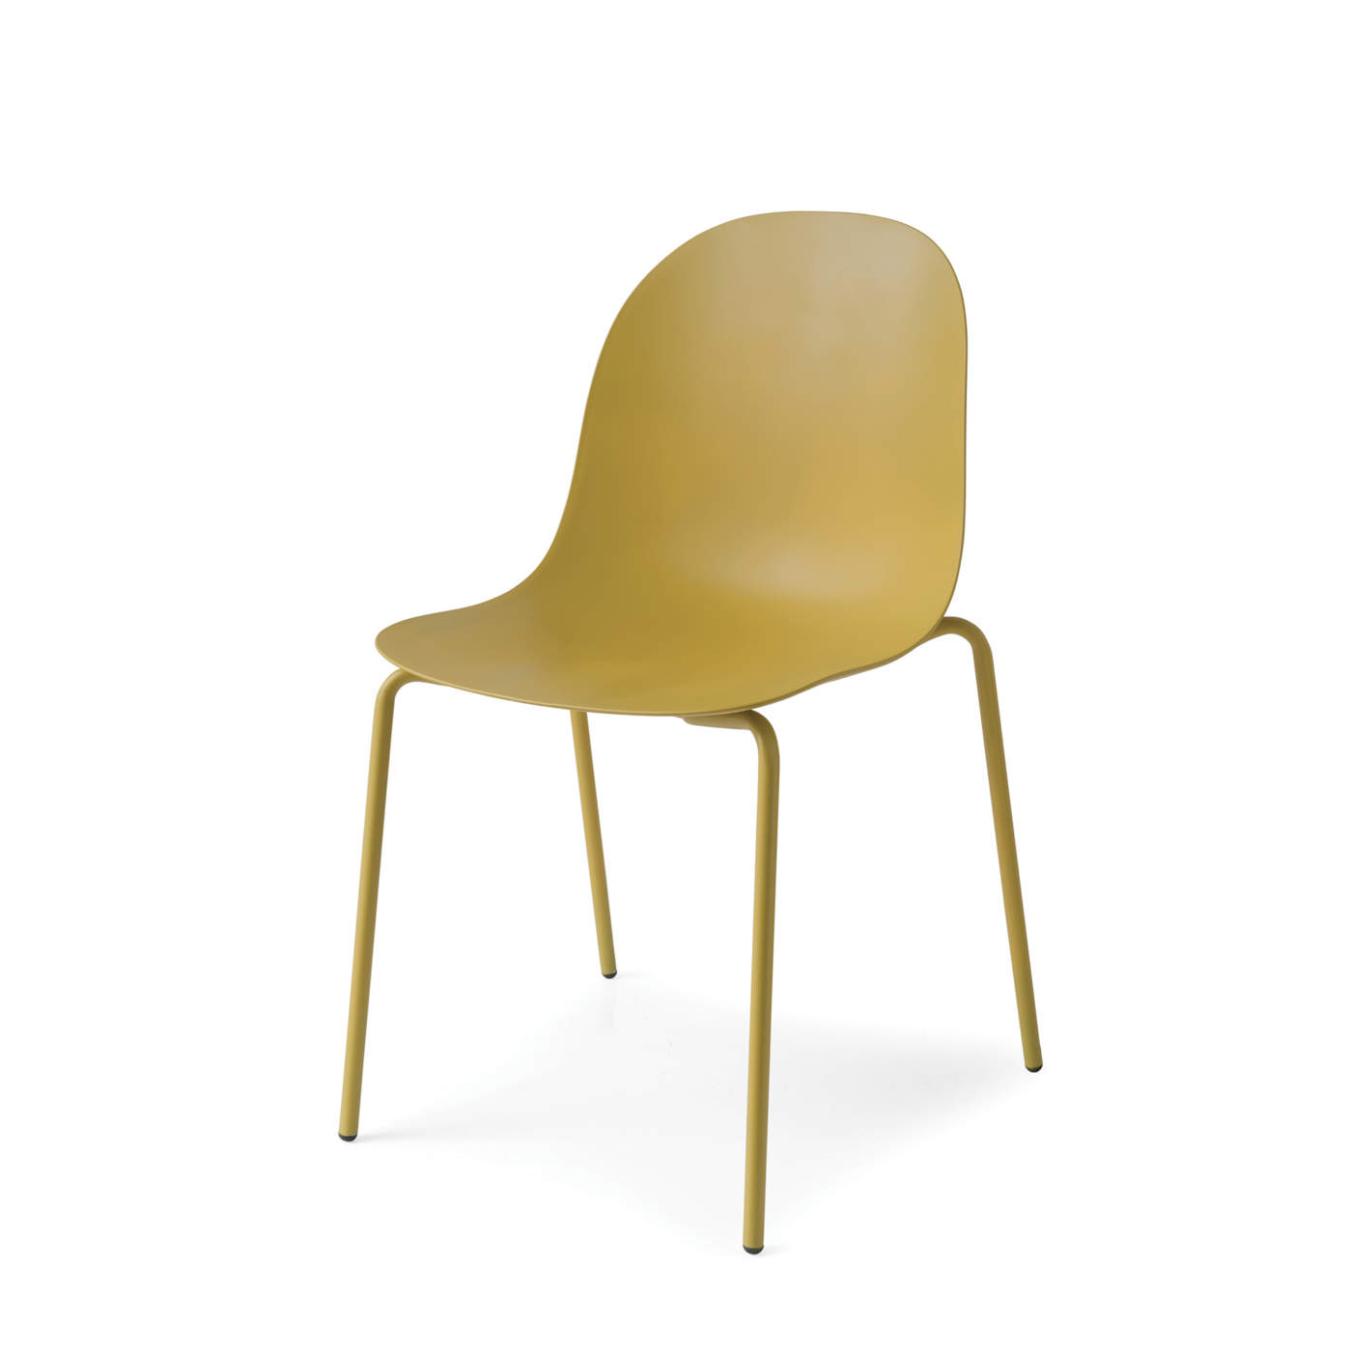 Connubia Academy pp dining chair // Academy pp dining chair